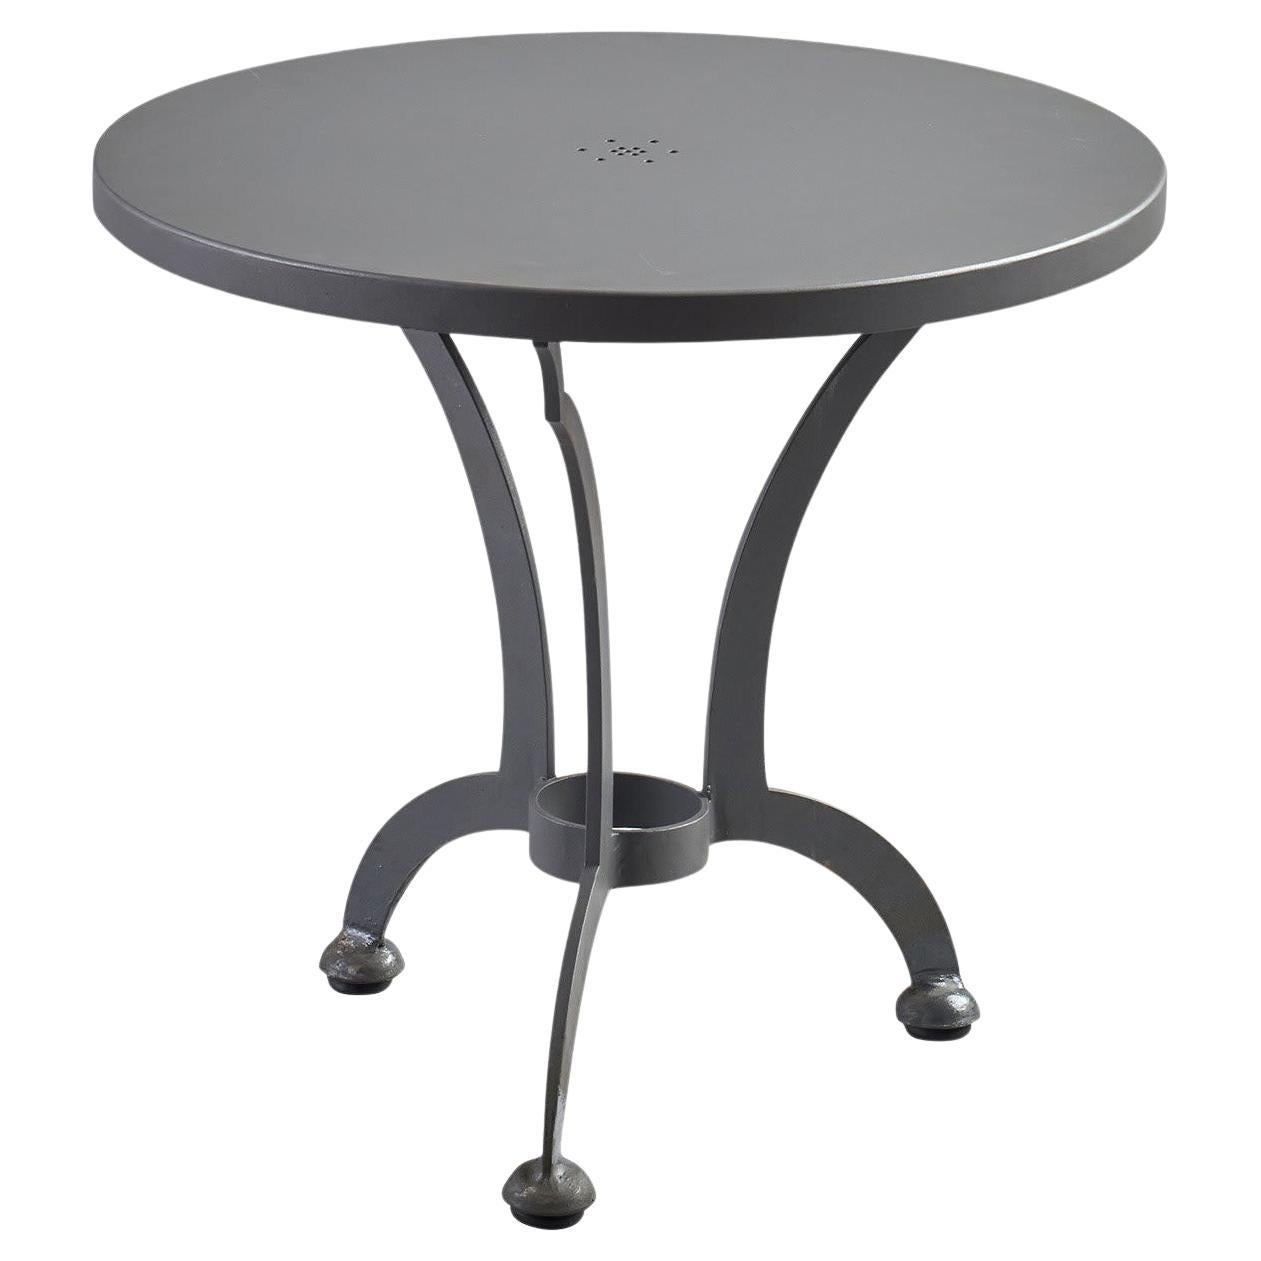 Table d'appoint ronde Archi